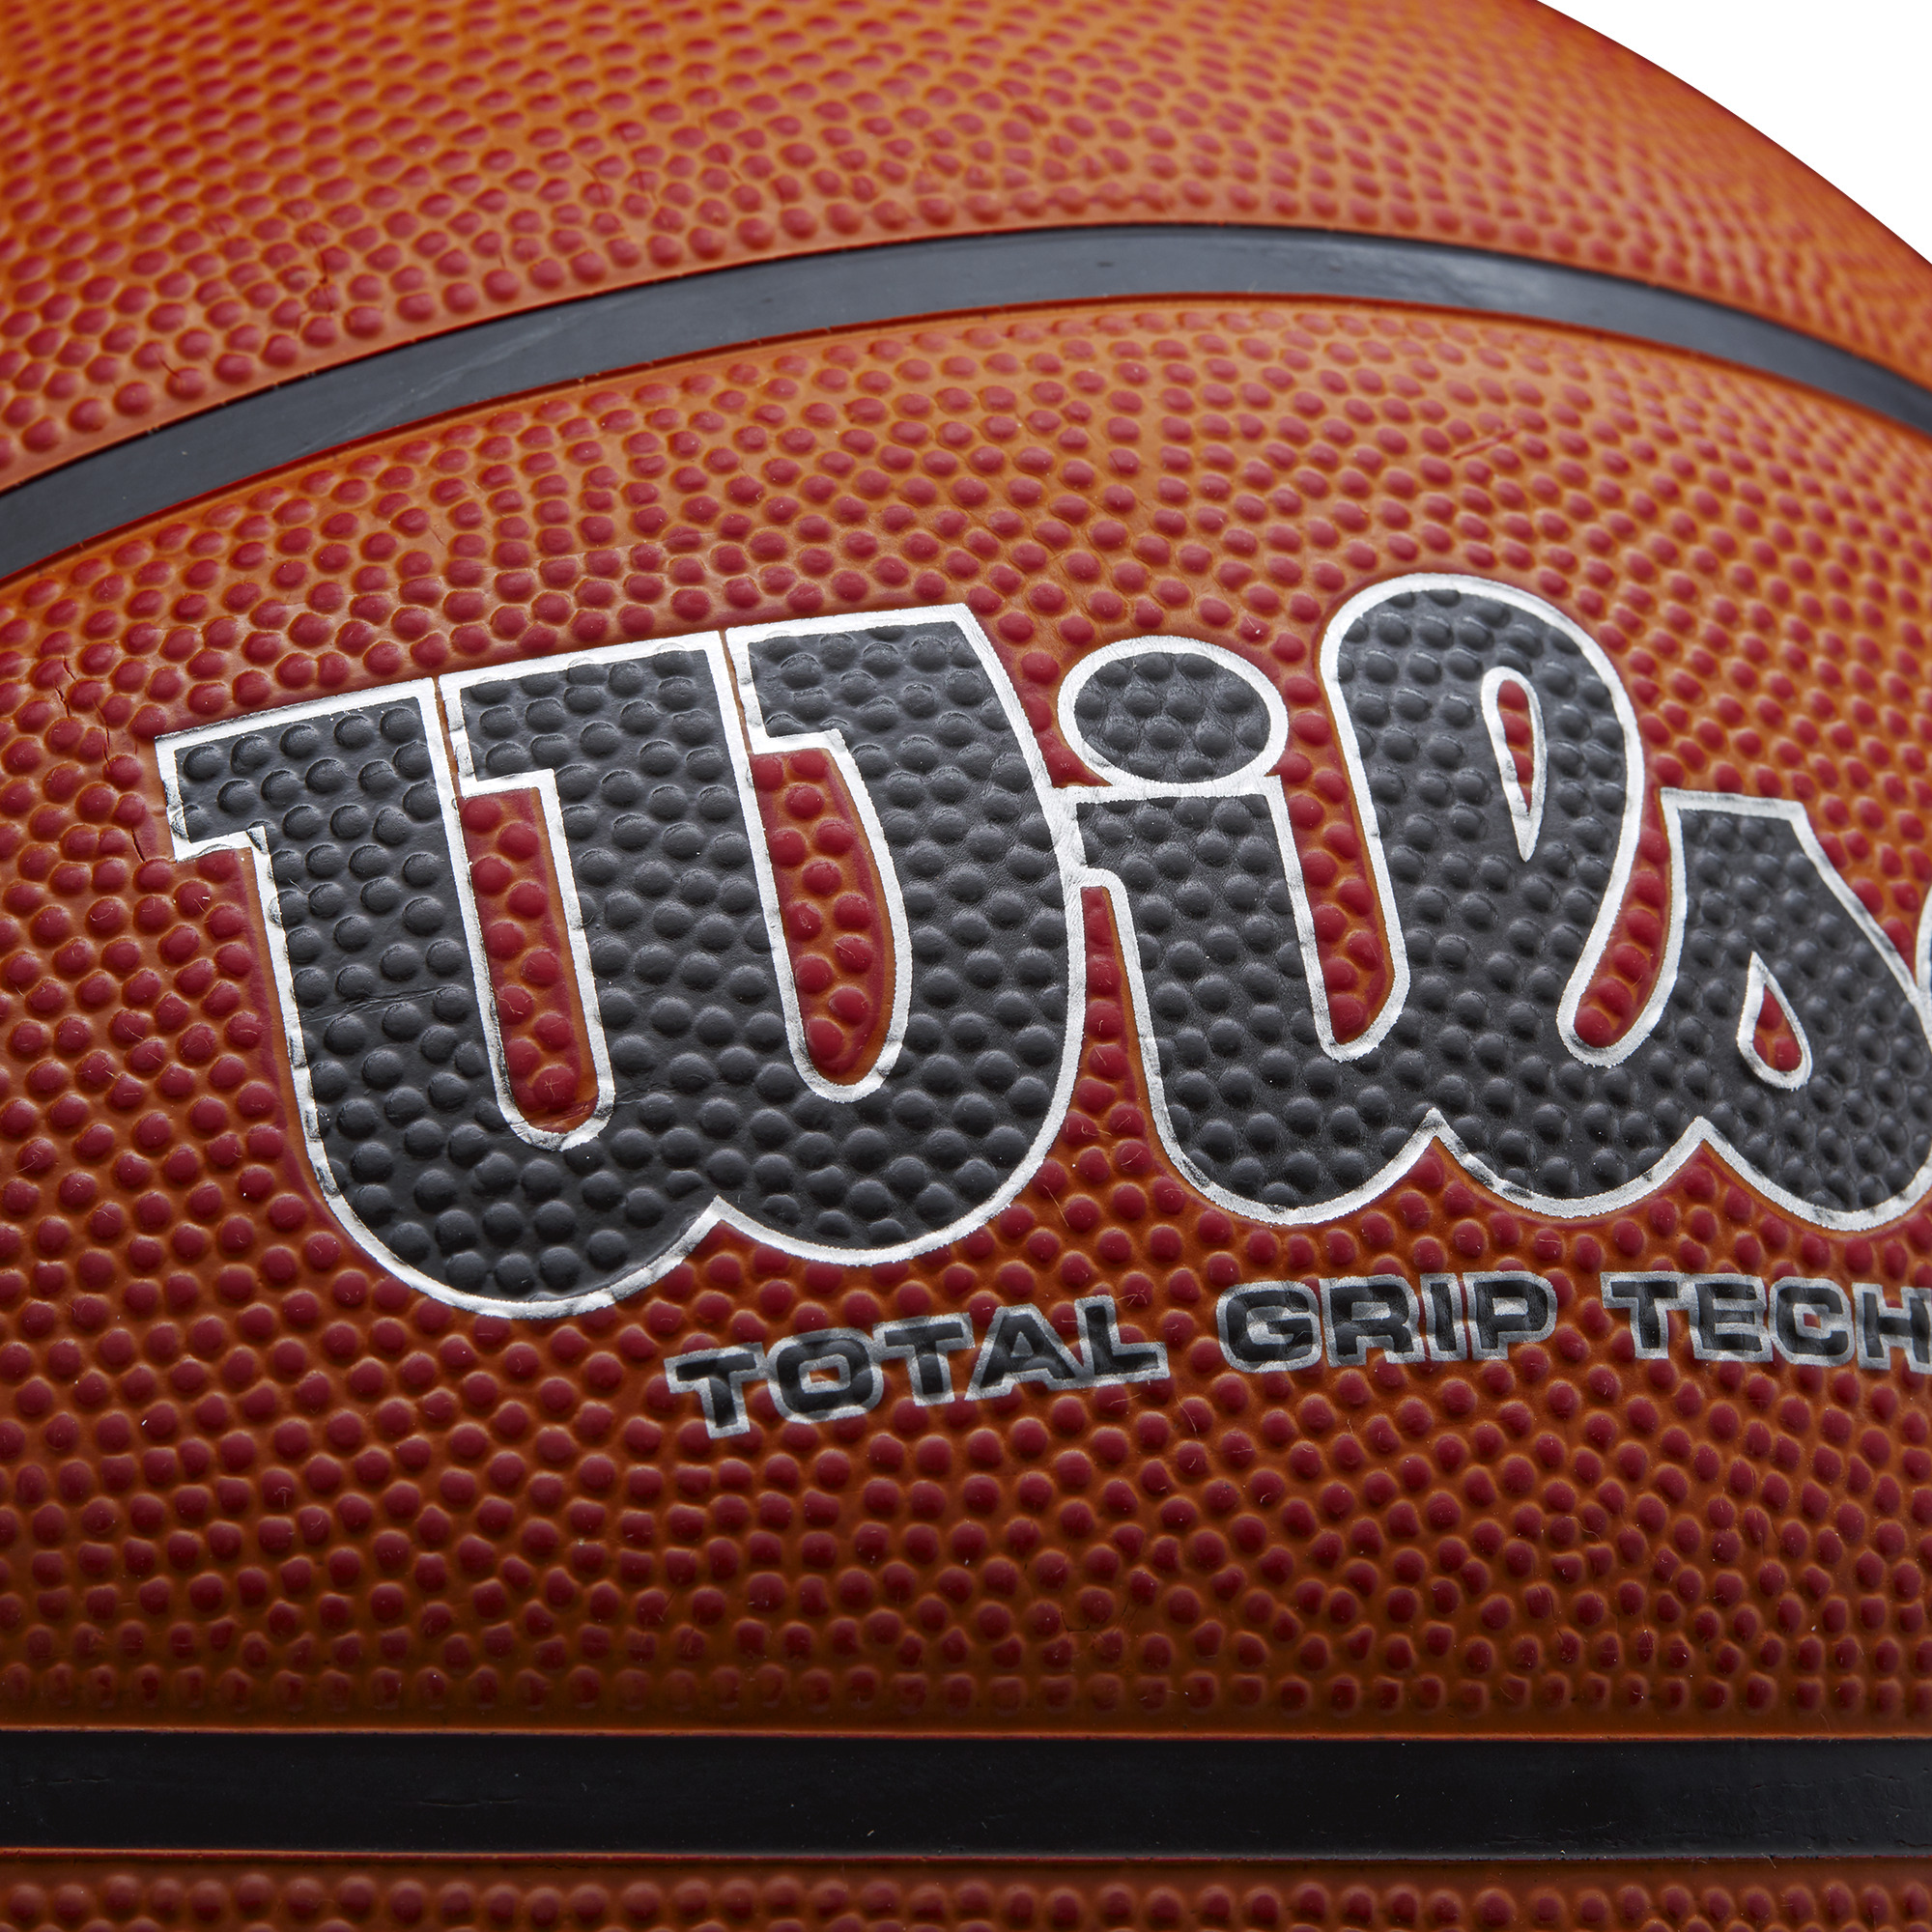 Wilson NCAA Street Shot Outdoor Basketball, Official Size 29.5" - image 5 of 6